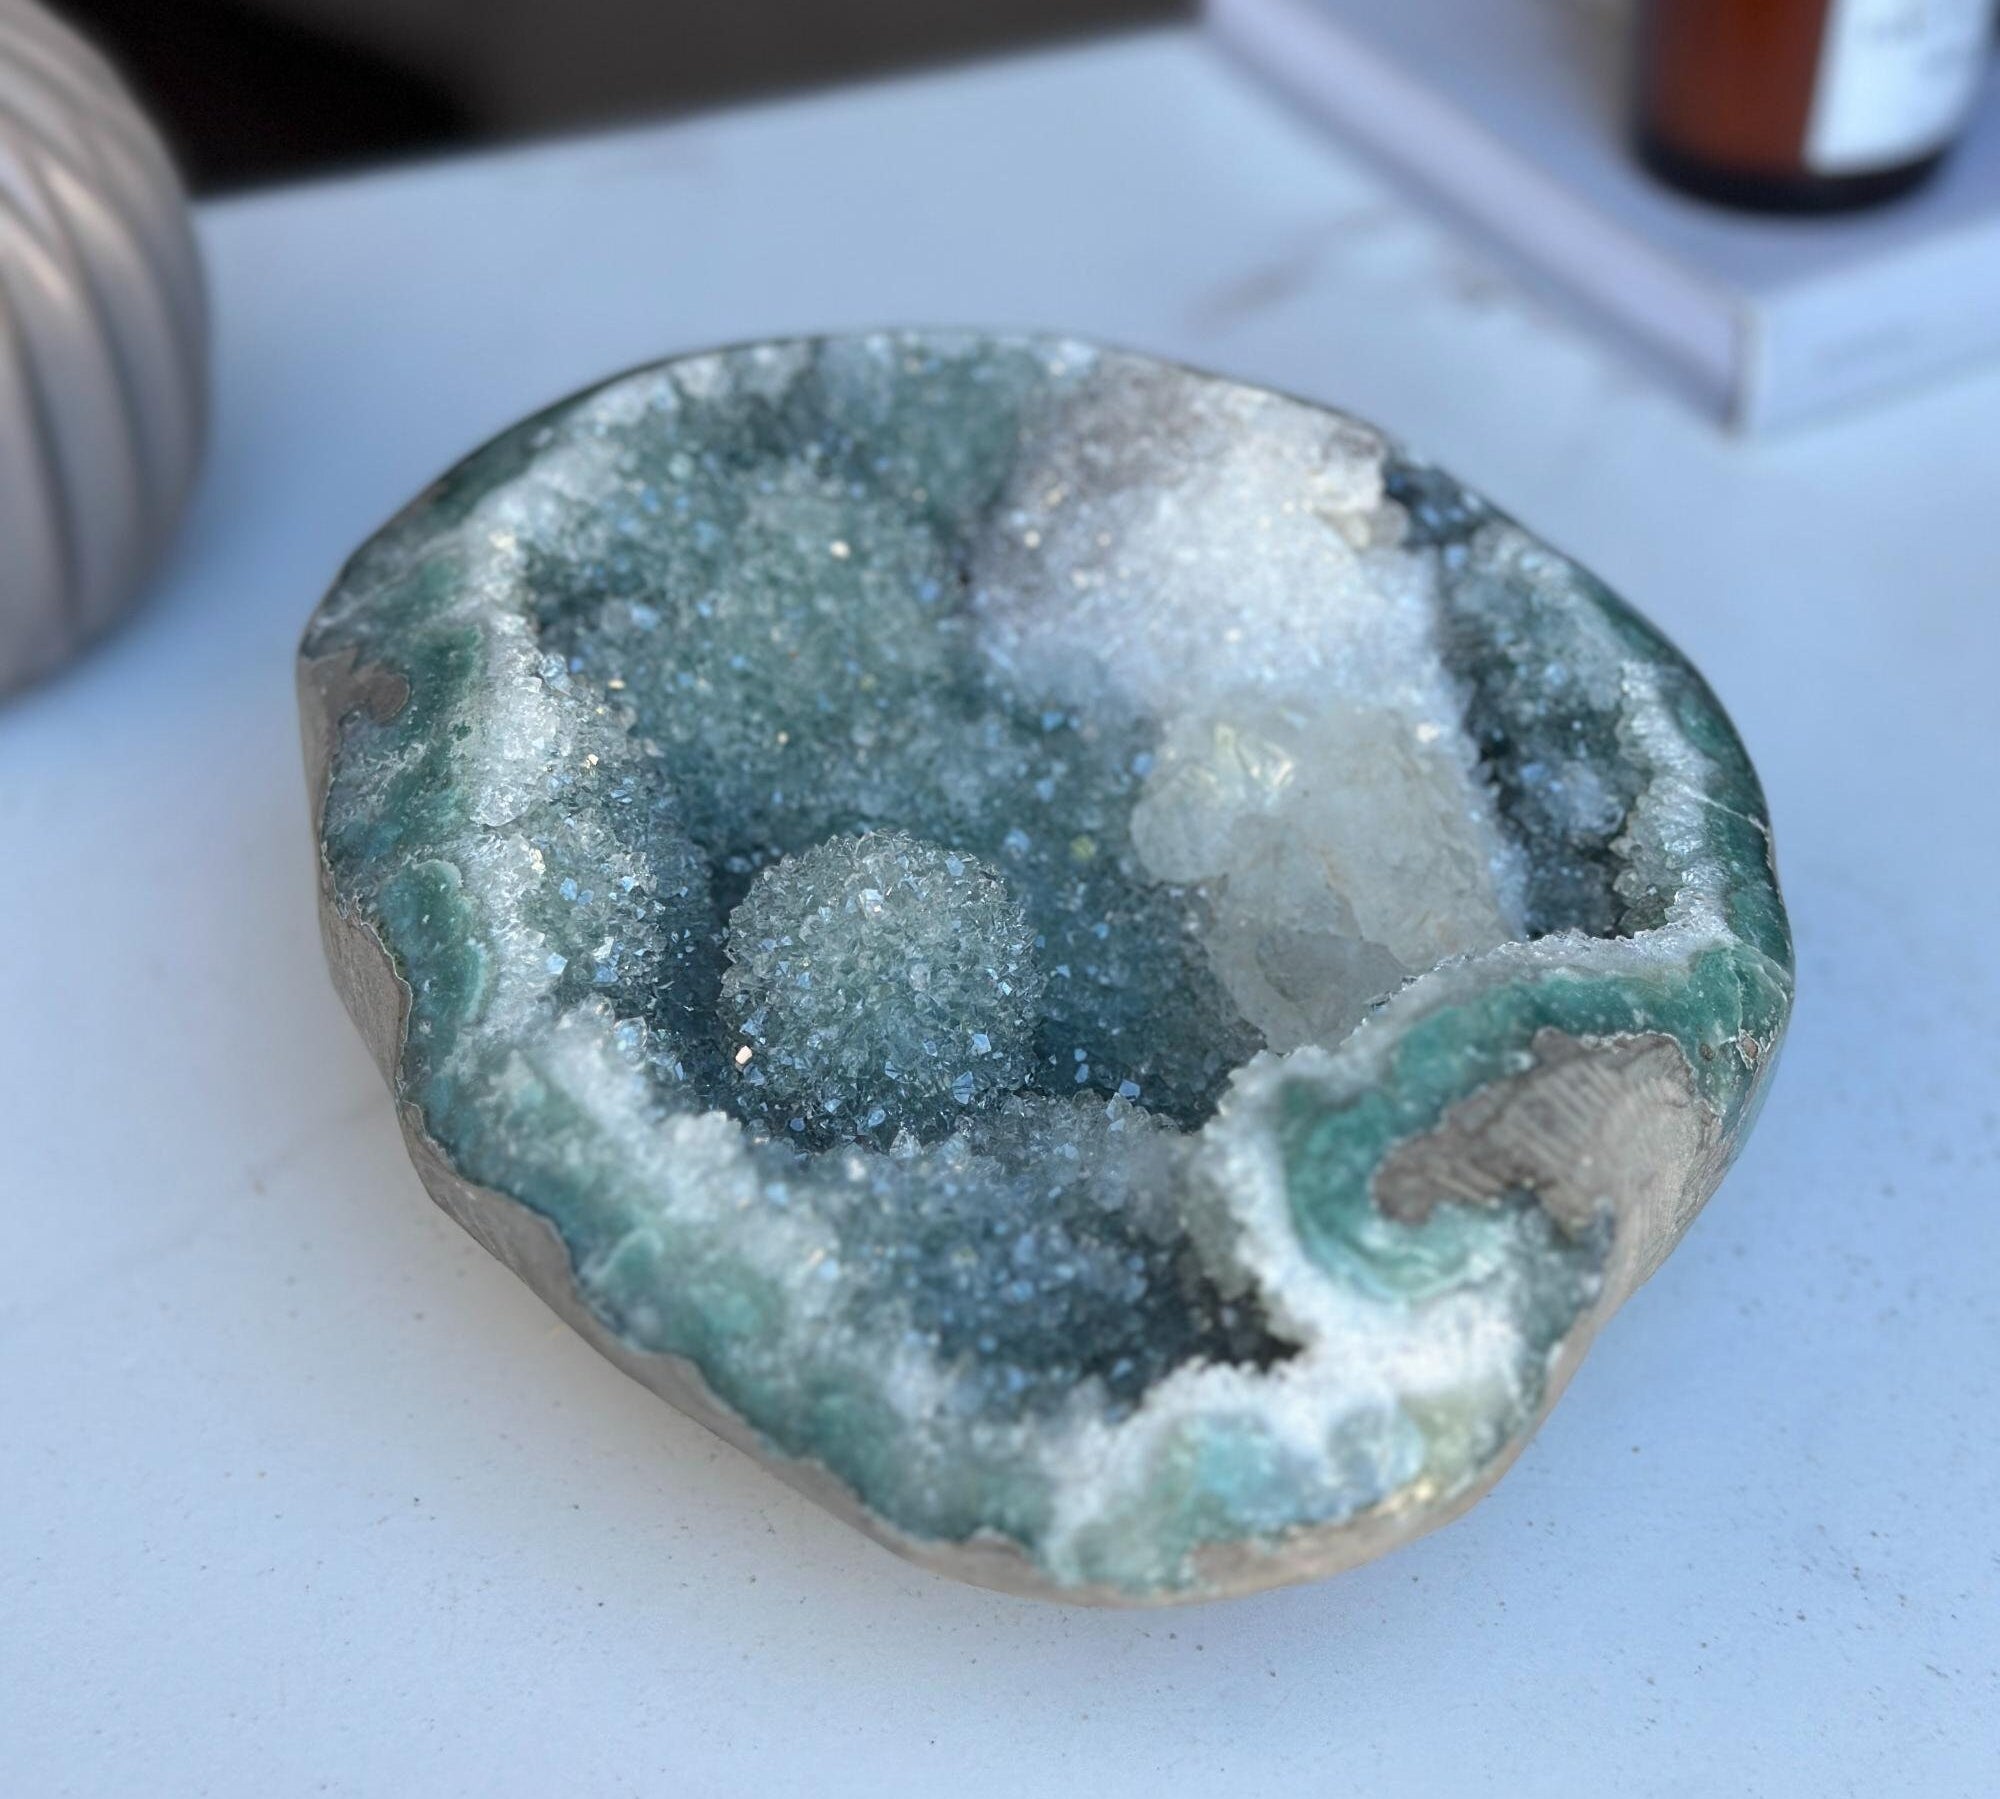 Green Jasper and Calcite Geode Bowl, Natural Quartz Crystal Round Shaped Cluster, Home Decor Crystal Geode Cave, Tabletop Centerpiece